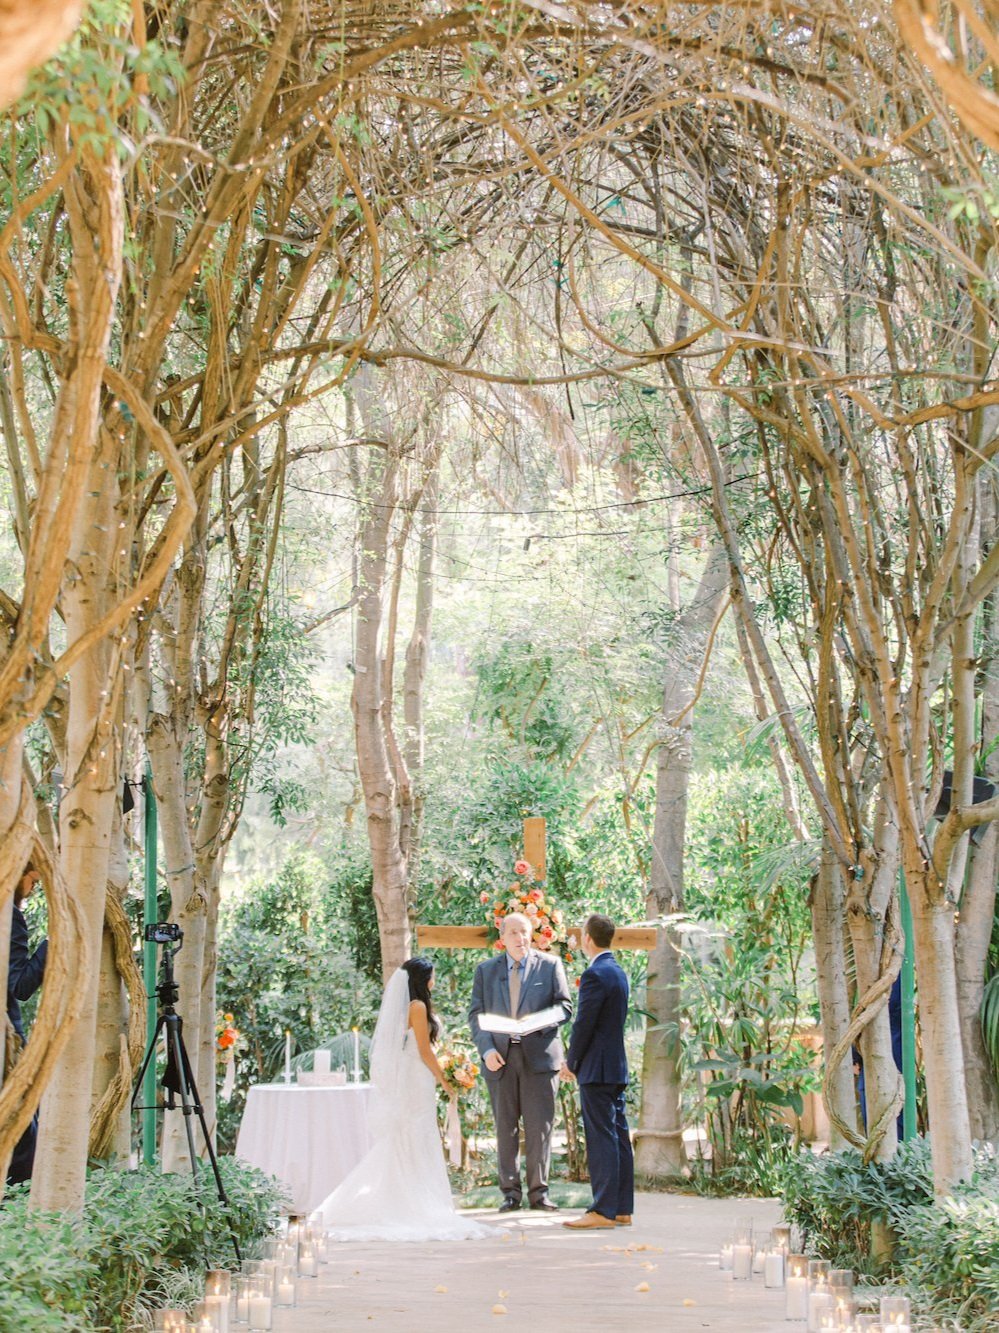 Top 6 Outdoor Wedding Venues In Los Angeles — To Be Loved Events